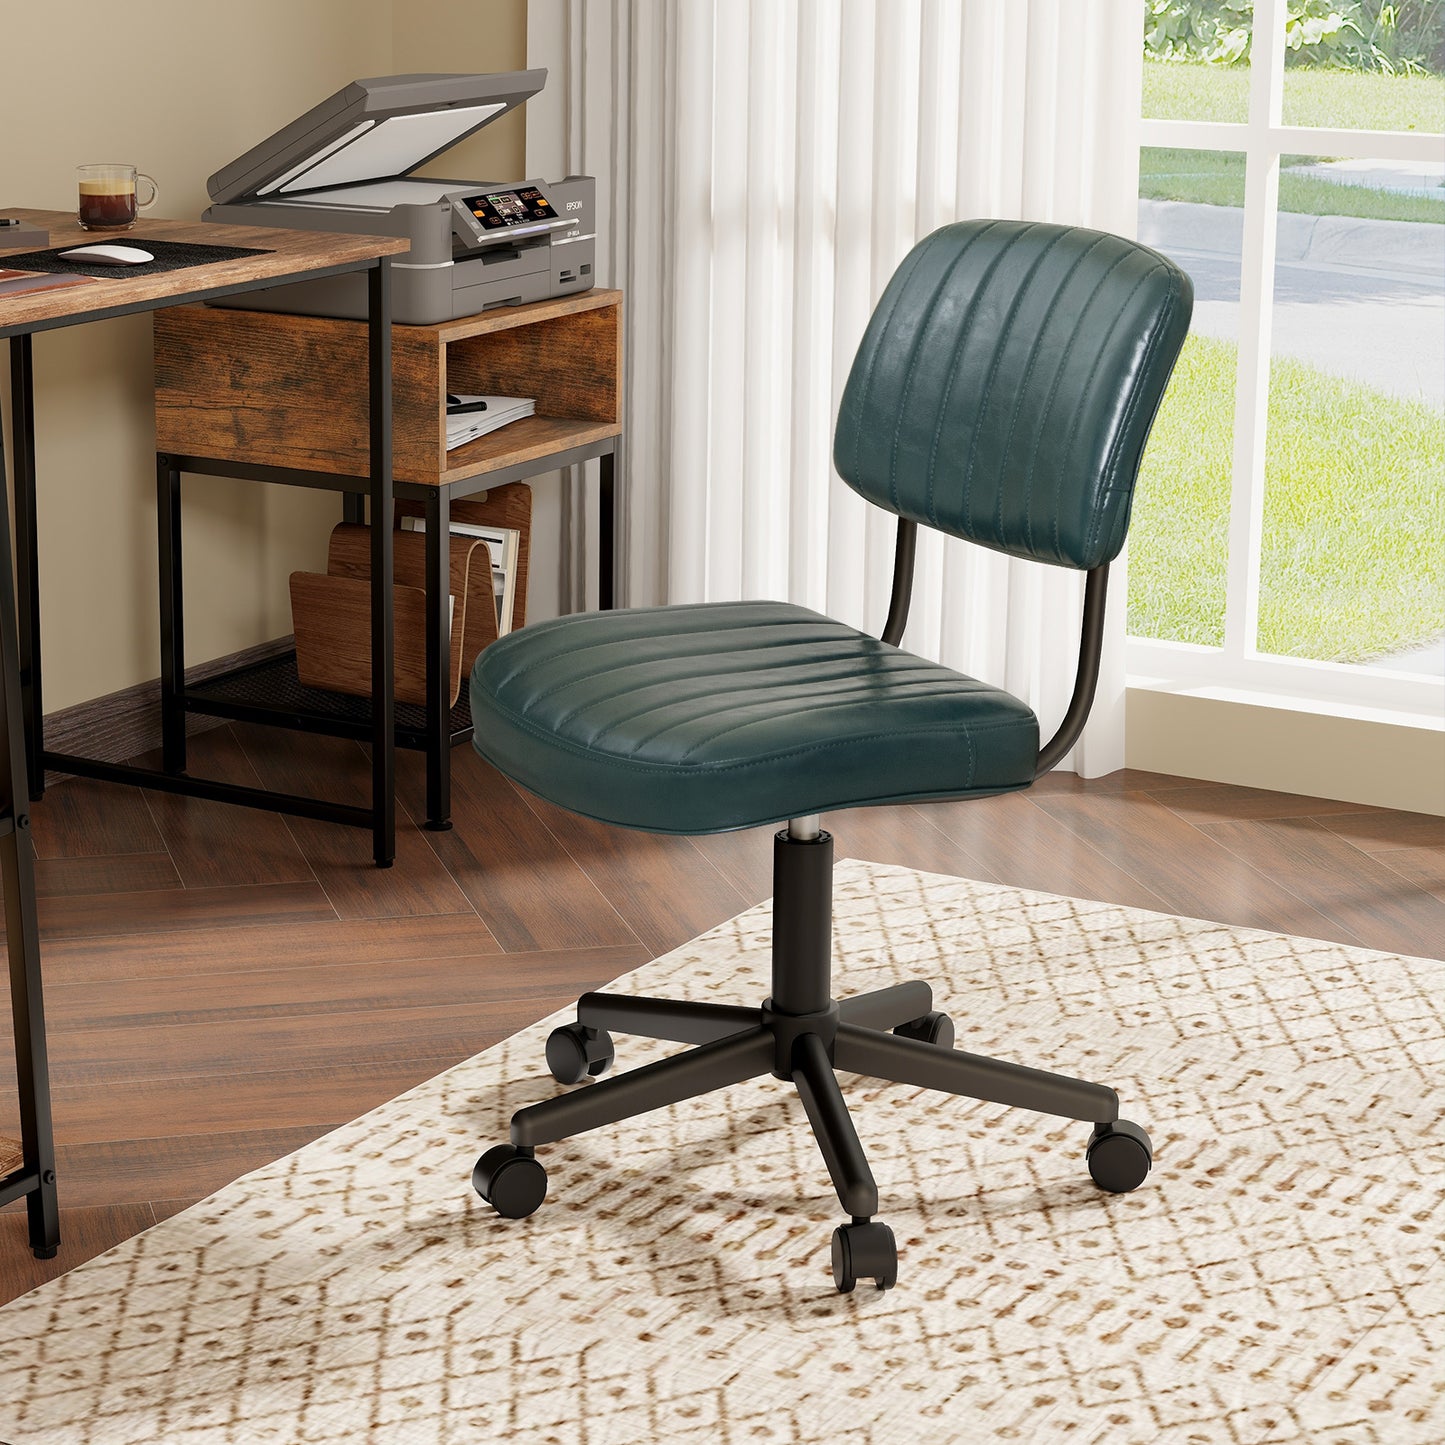 PU Leather Adjustable Office Chair  Swivel Task Chair with Backrest-Green